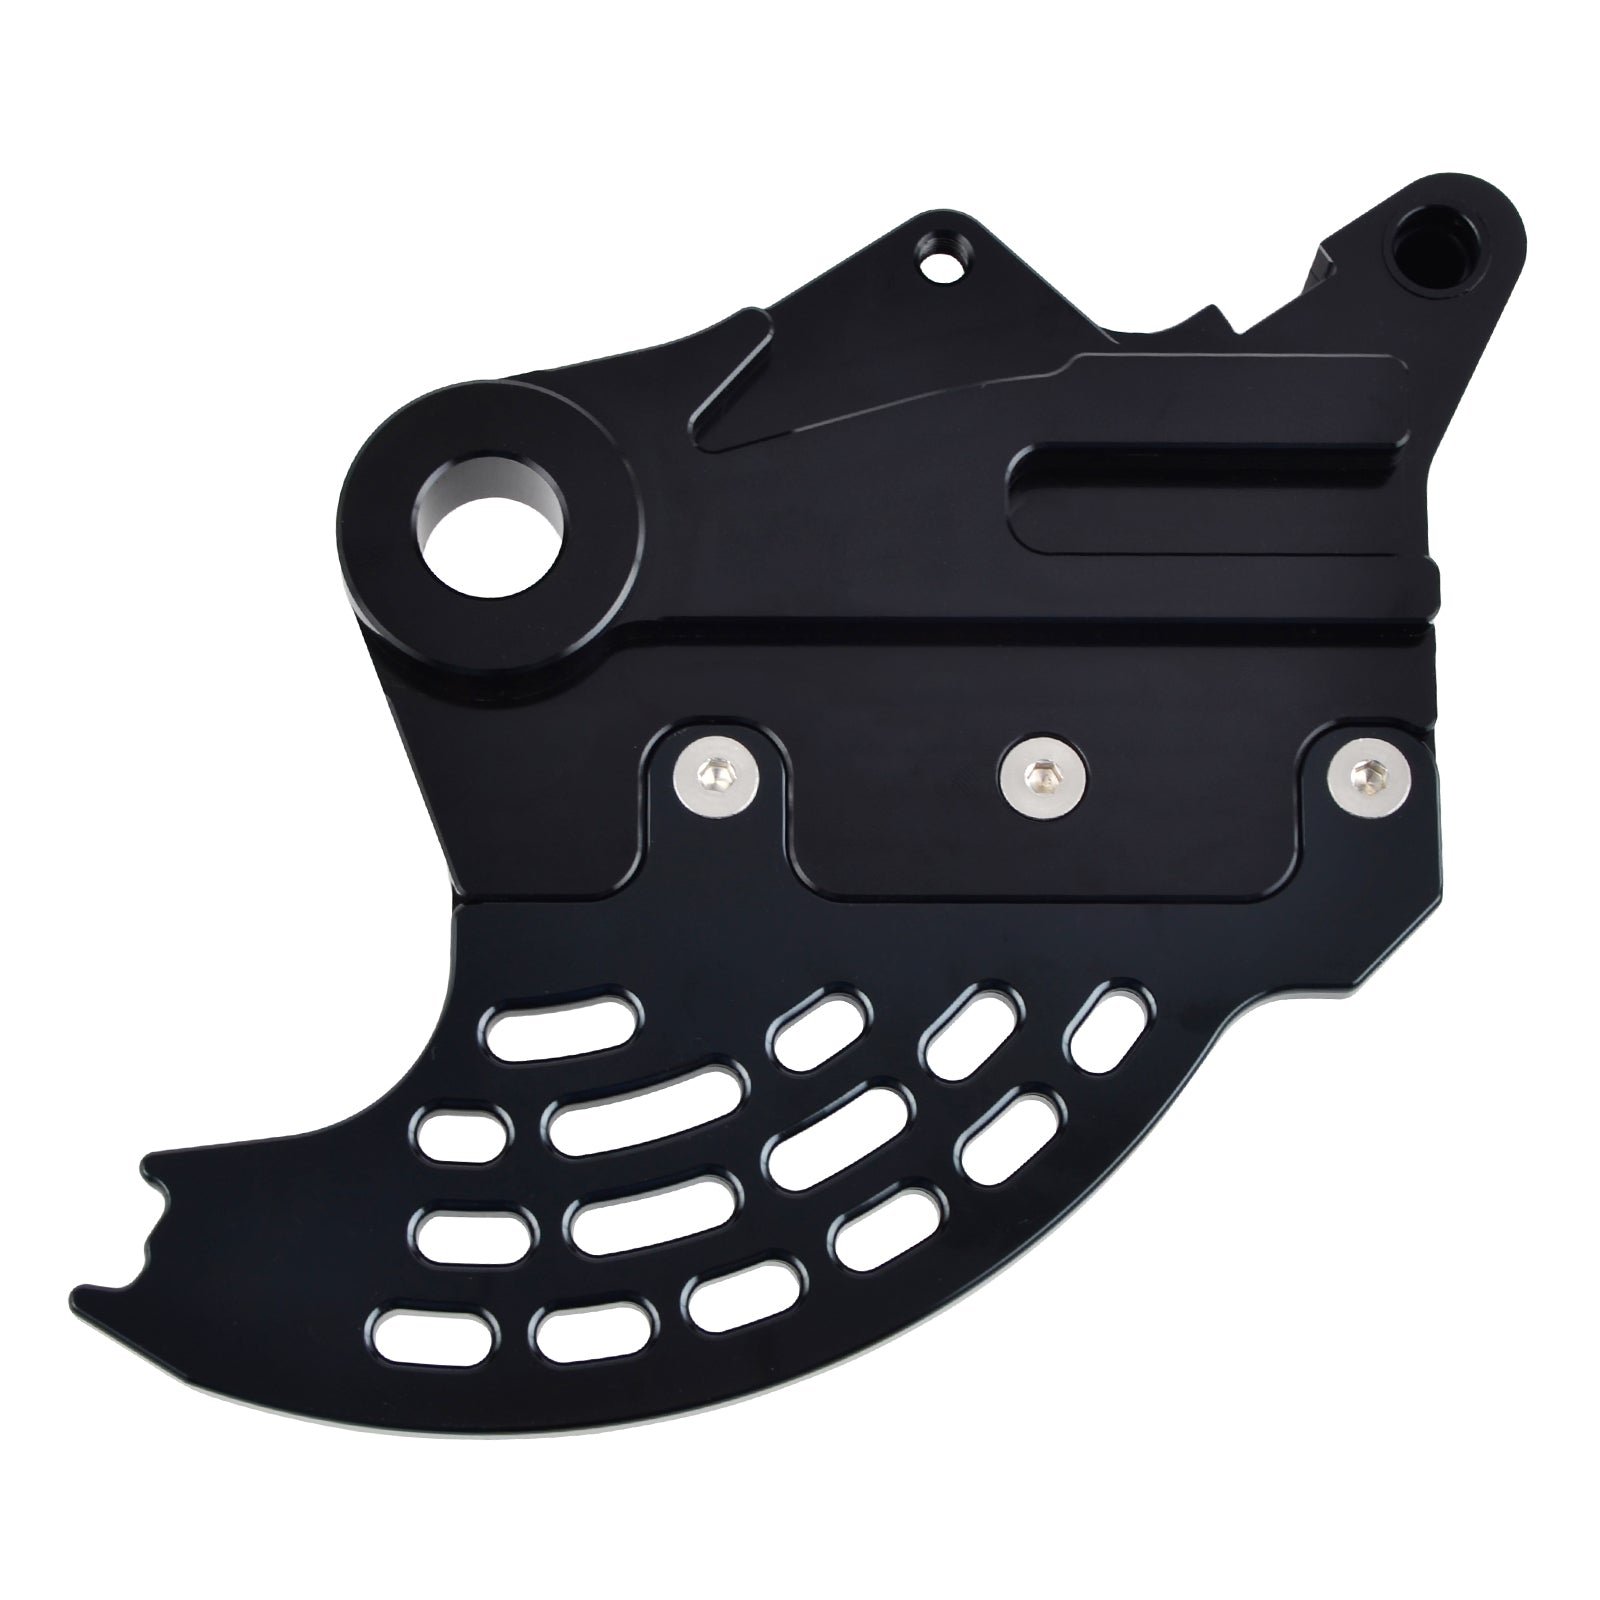 Rear Brake Disc Guard Protector Cover For Beta 250 300 350 390 430 450 480 520 500 RR RS X-Trainer 300 RR-S 2015-2020 2019 2018 - Auto GoShop